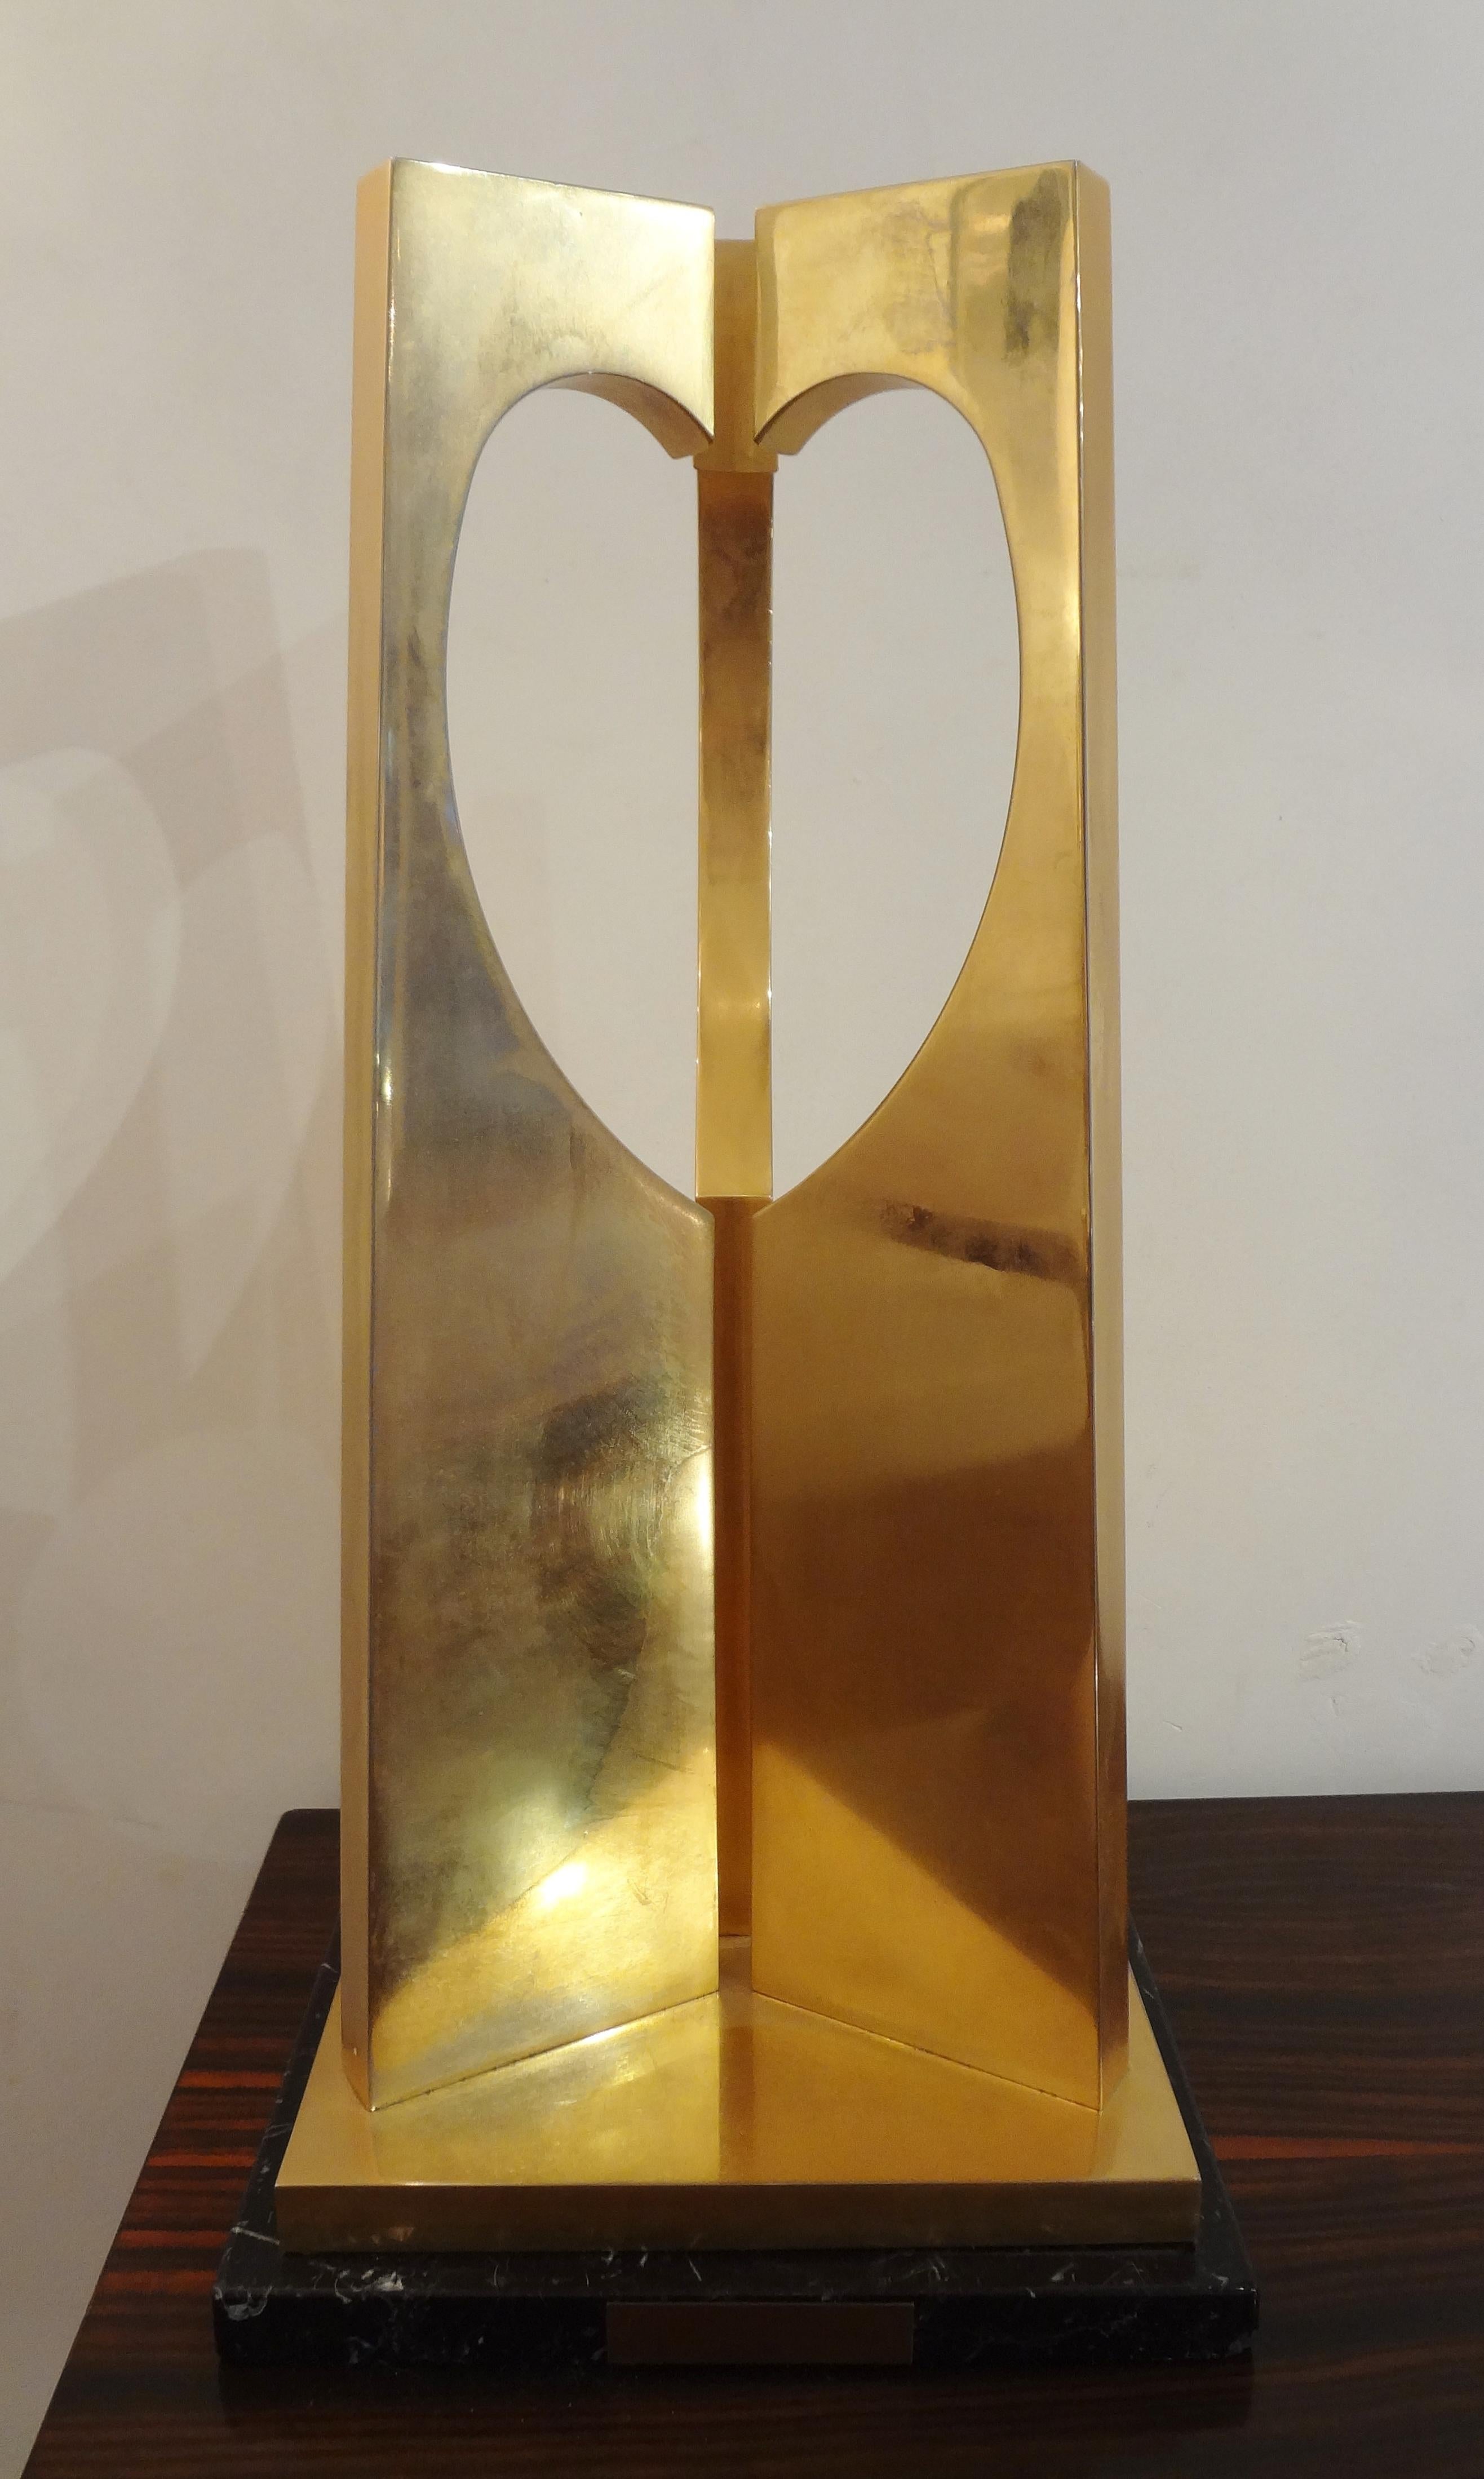 Donald Smith et J.D.Marquese, USA.
Gilt bronze sculpture called Open hearts, 1980.
On a black square marble base (w. 
Measures: Bronze H 16 3/4 x W 7 1/2 - 8 inches.